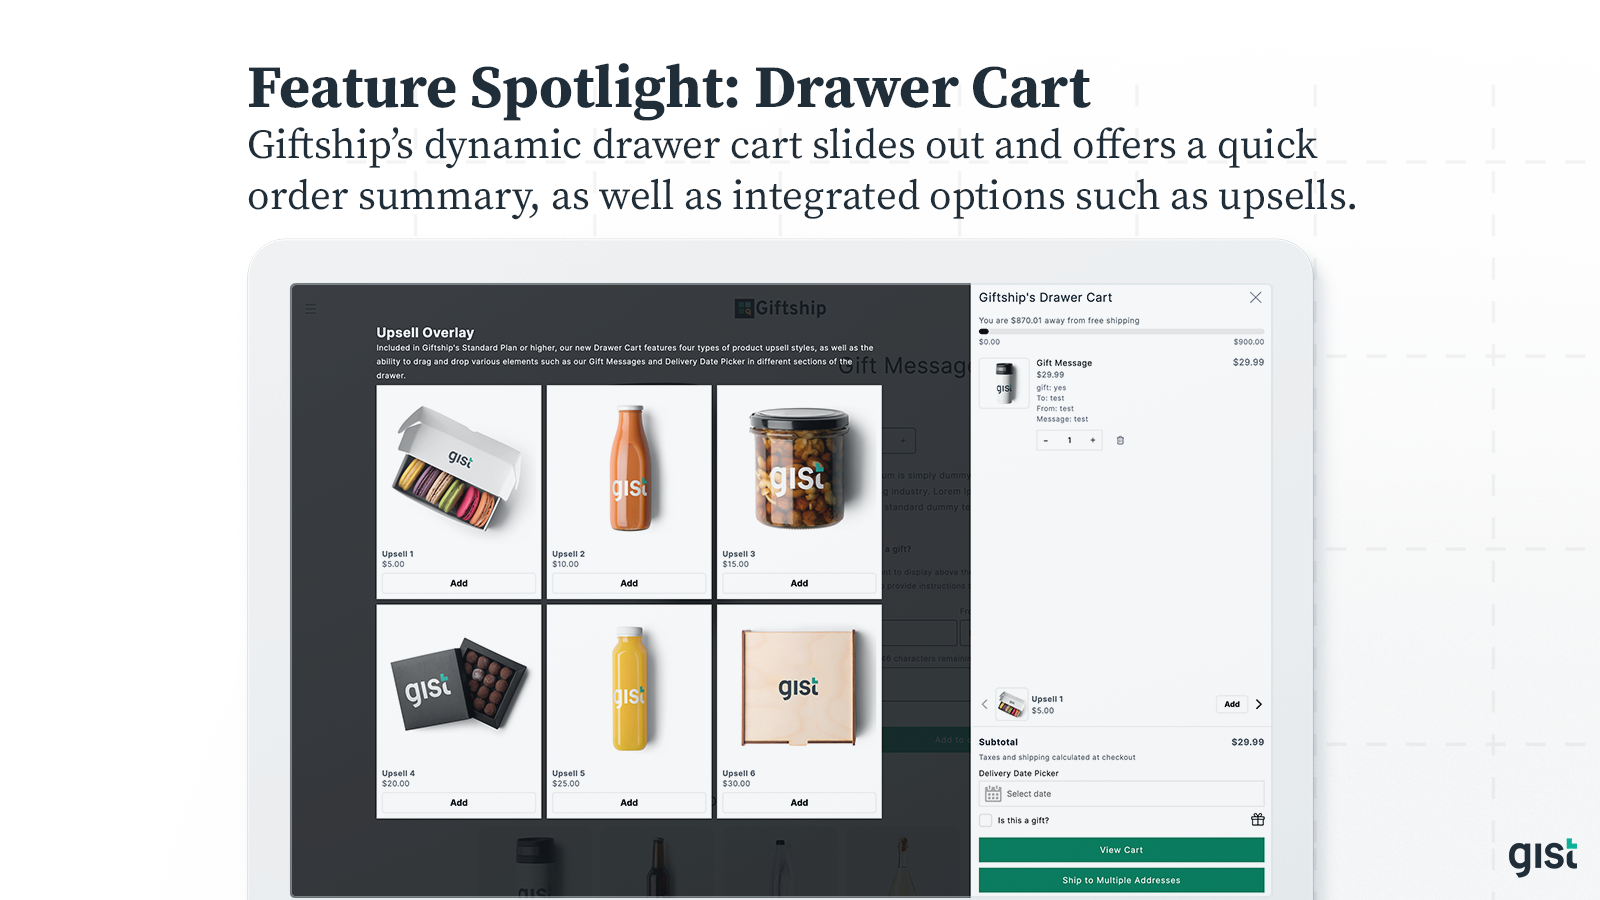 Give a better experience with a drawer slide cart with upsells.